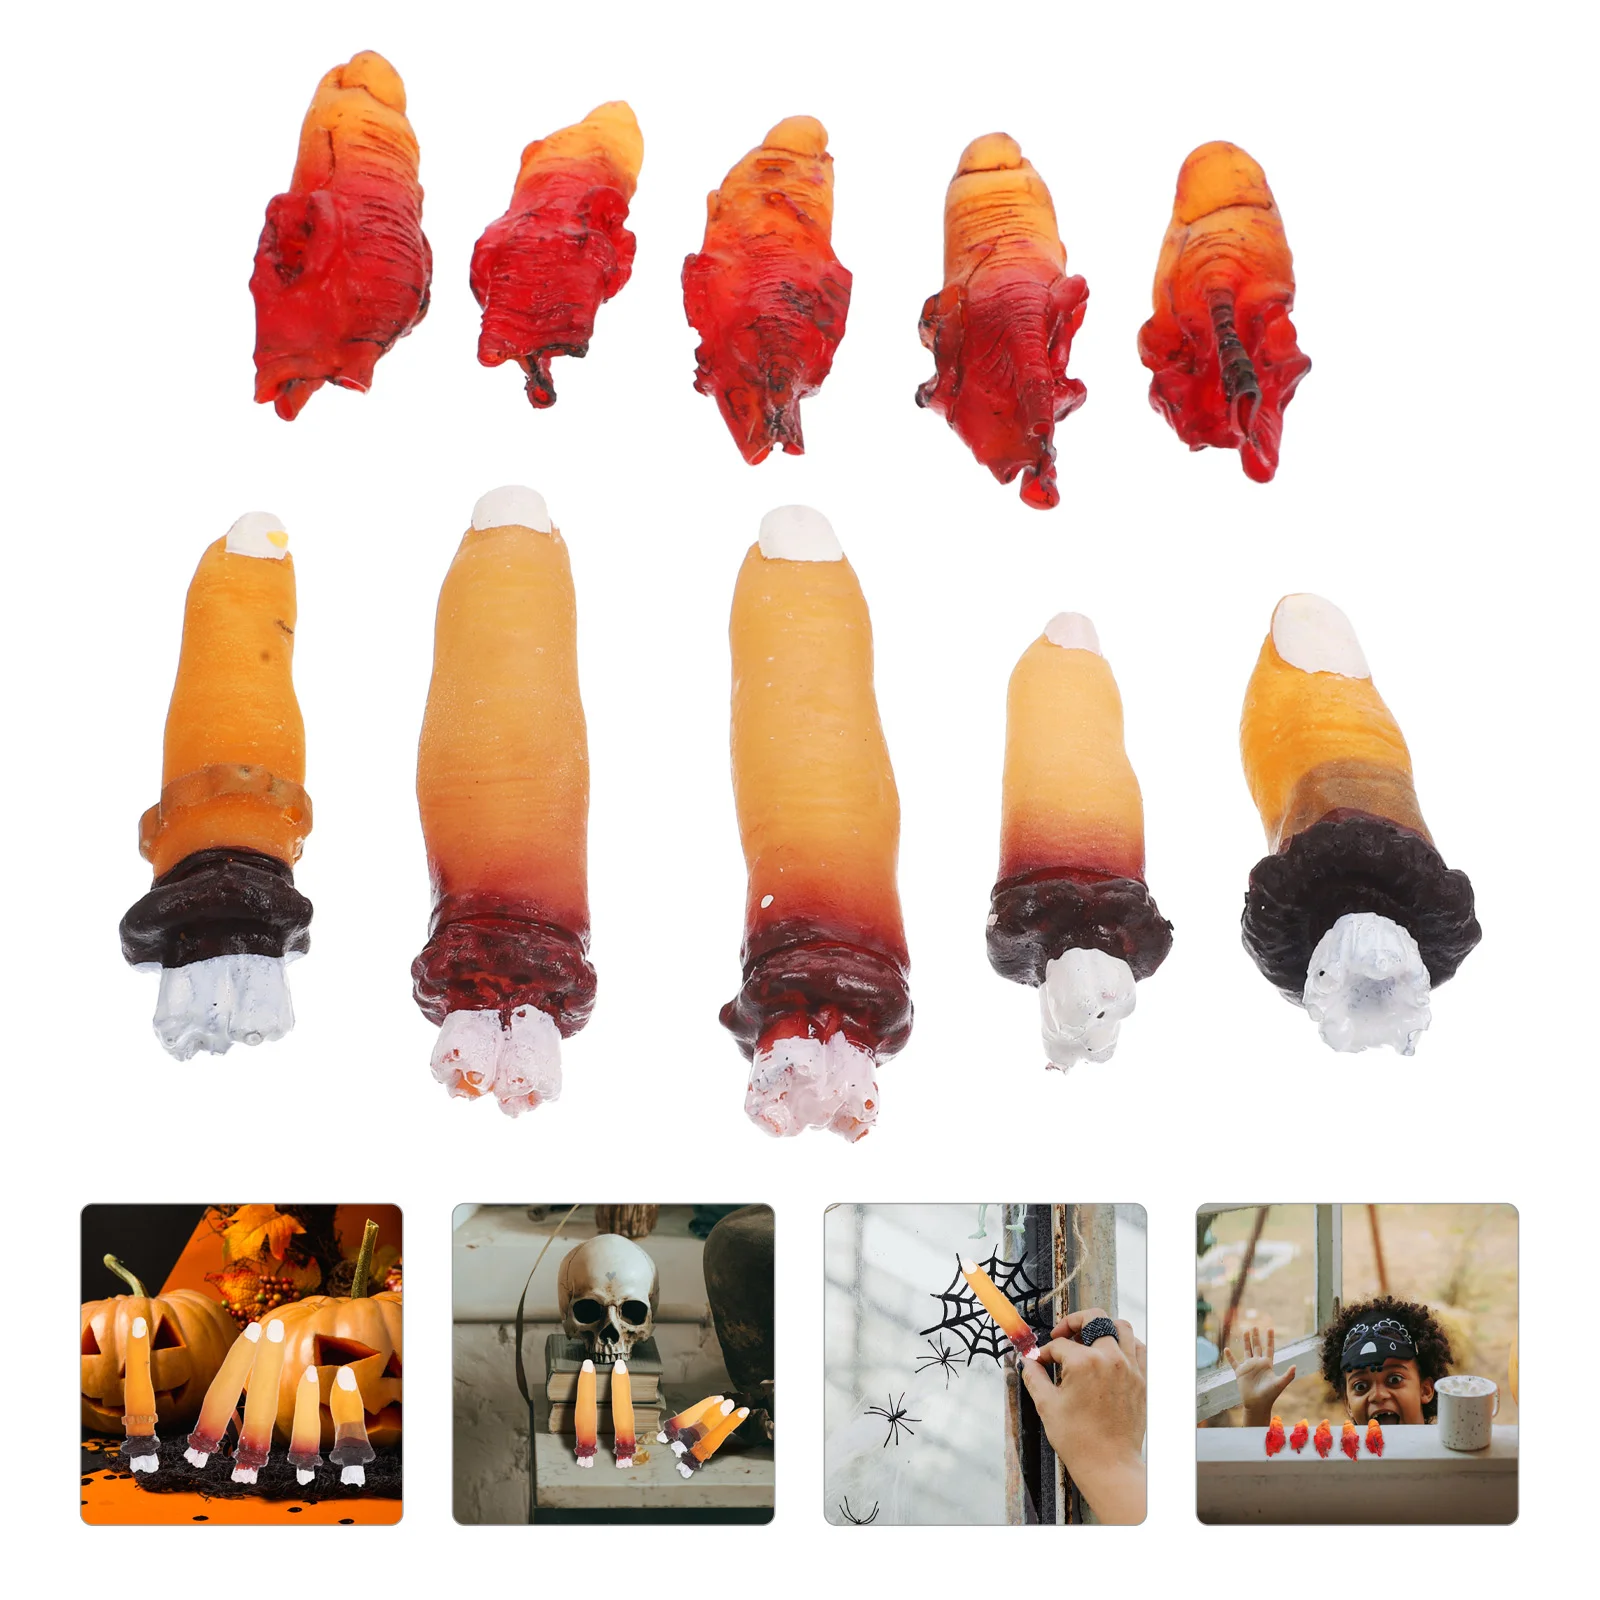 

10 Pcs Halloween Simulation Severed Finger Horror Party Supplies Toy Prank Blood Hands Fake Decor Artificial Props Tricky